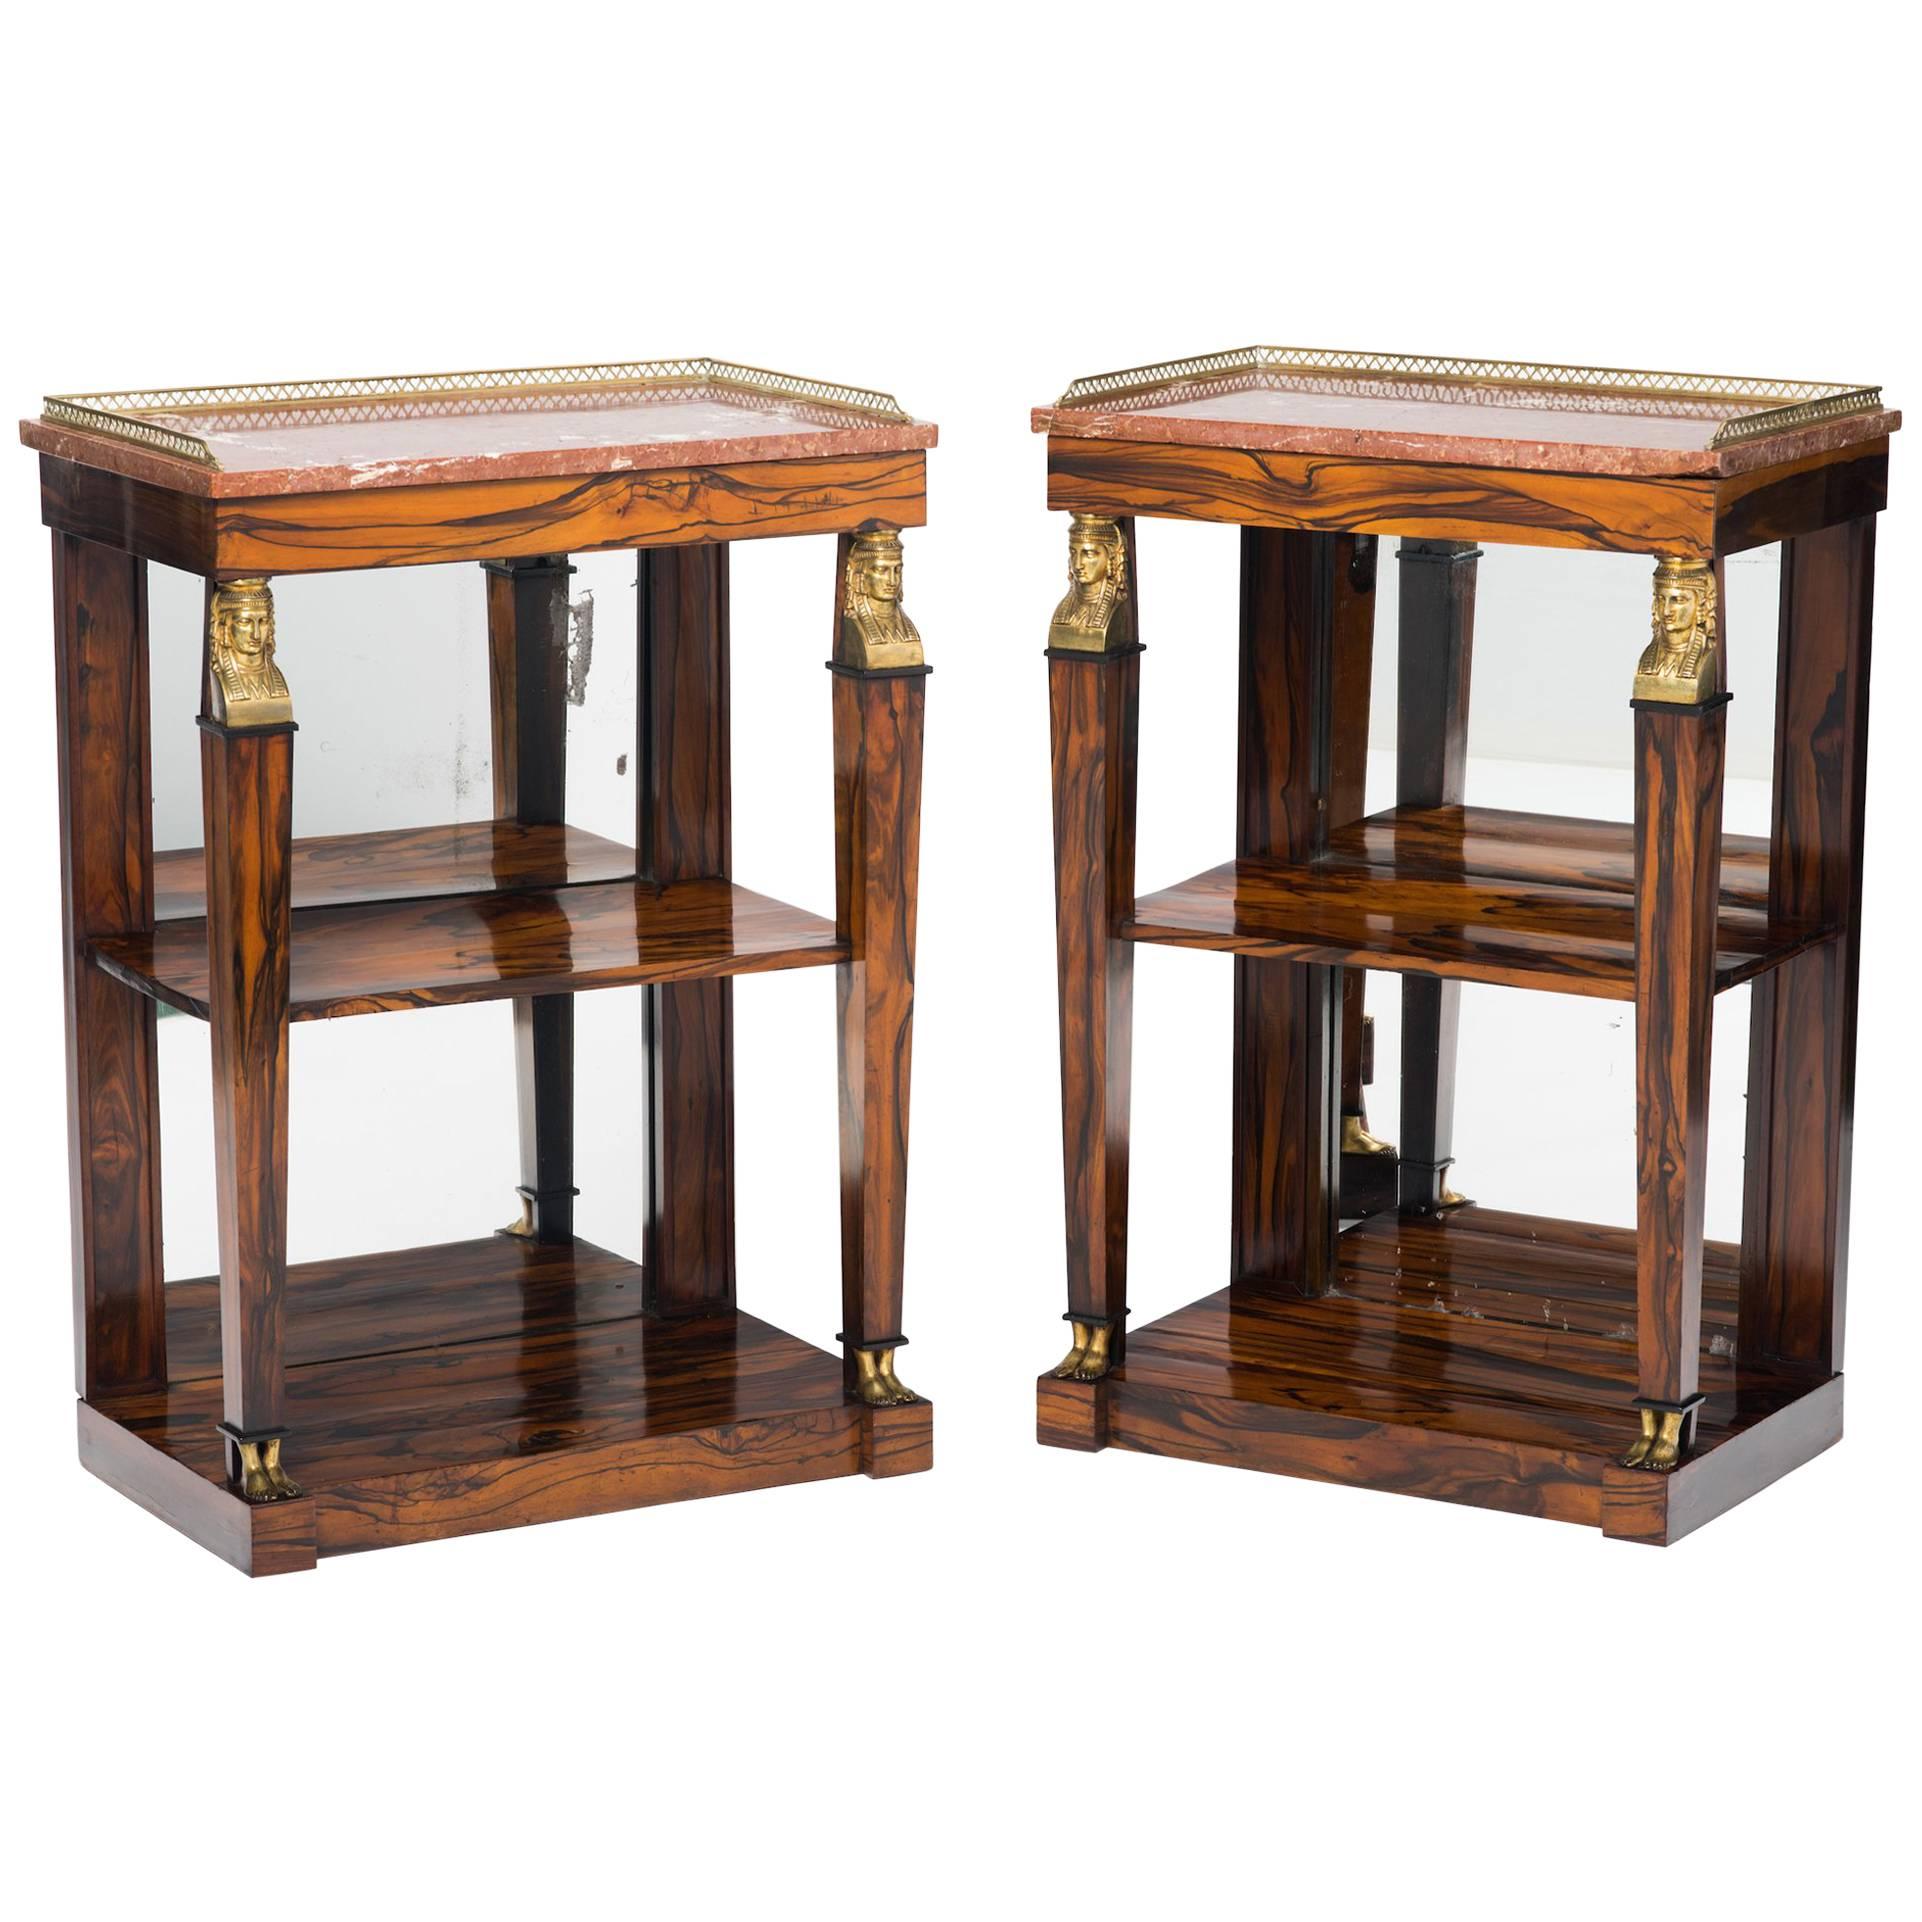 Pair of Regency Calamander Marble-Top and Mirror-Backed Open Bookcases For Sale